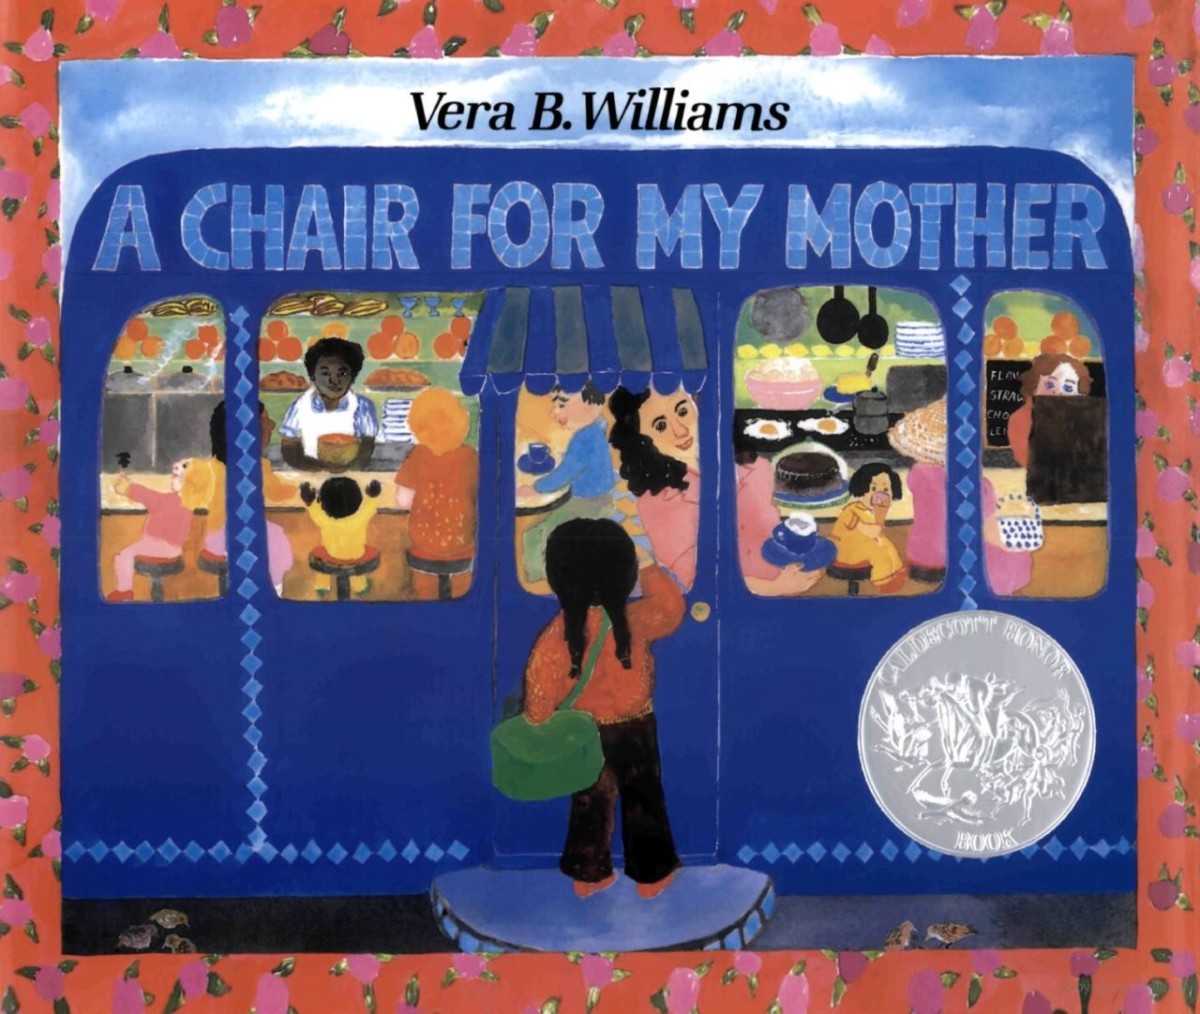 A Chair for My Mother by Vera B. Williams Children's Book Review